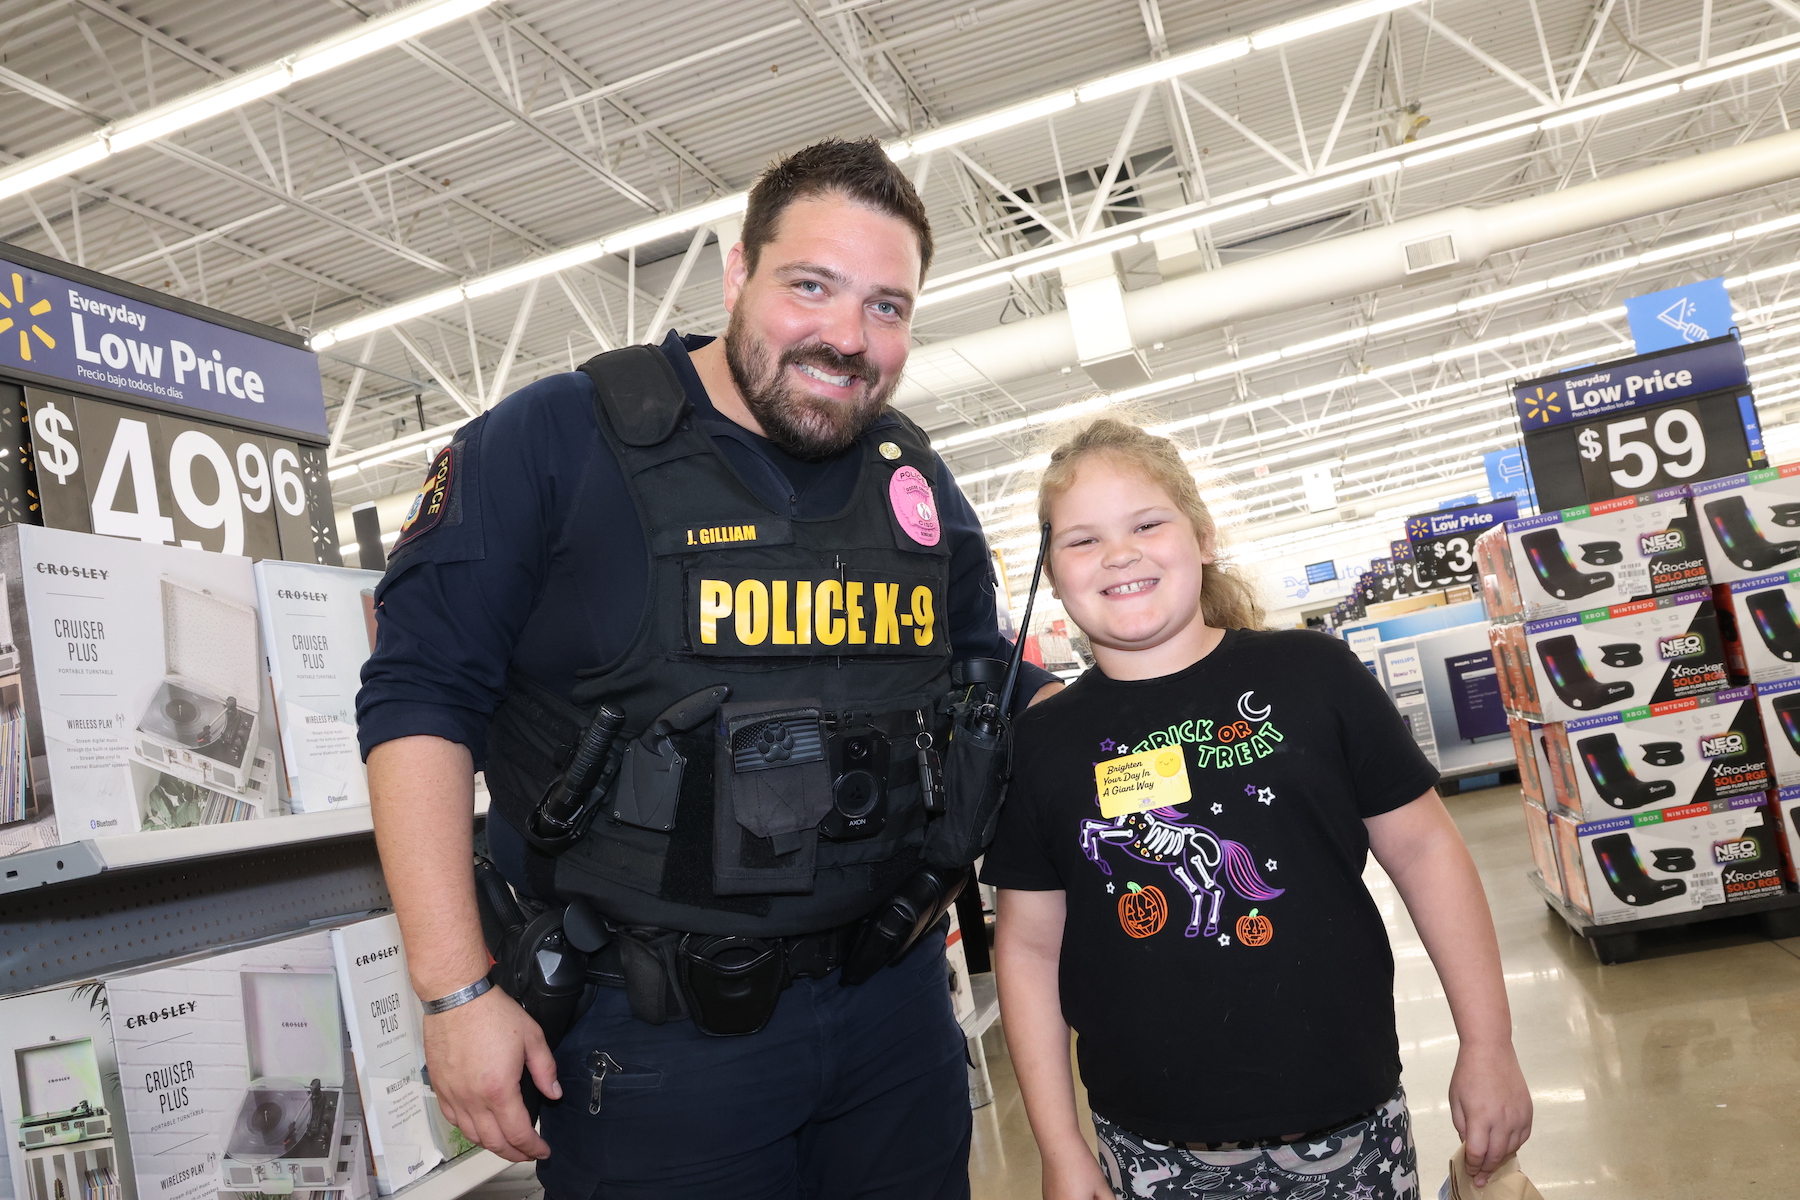 officer gilliam poses with student at walmart at the brighten your day event